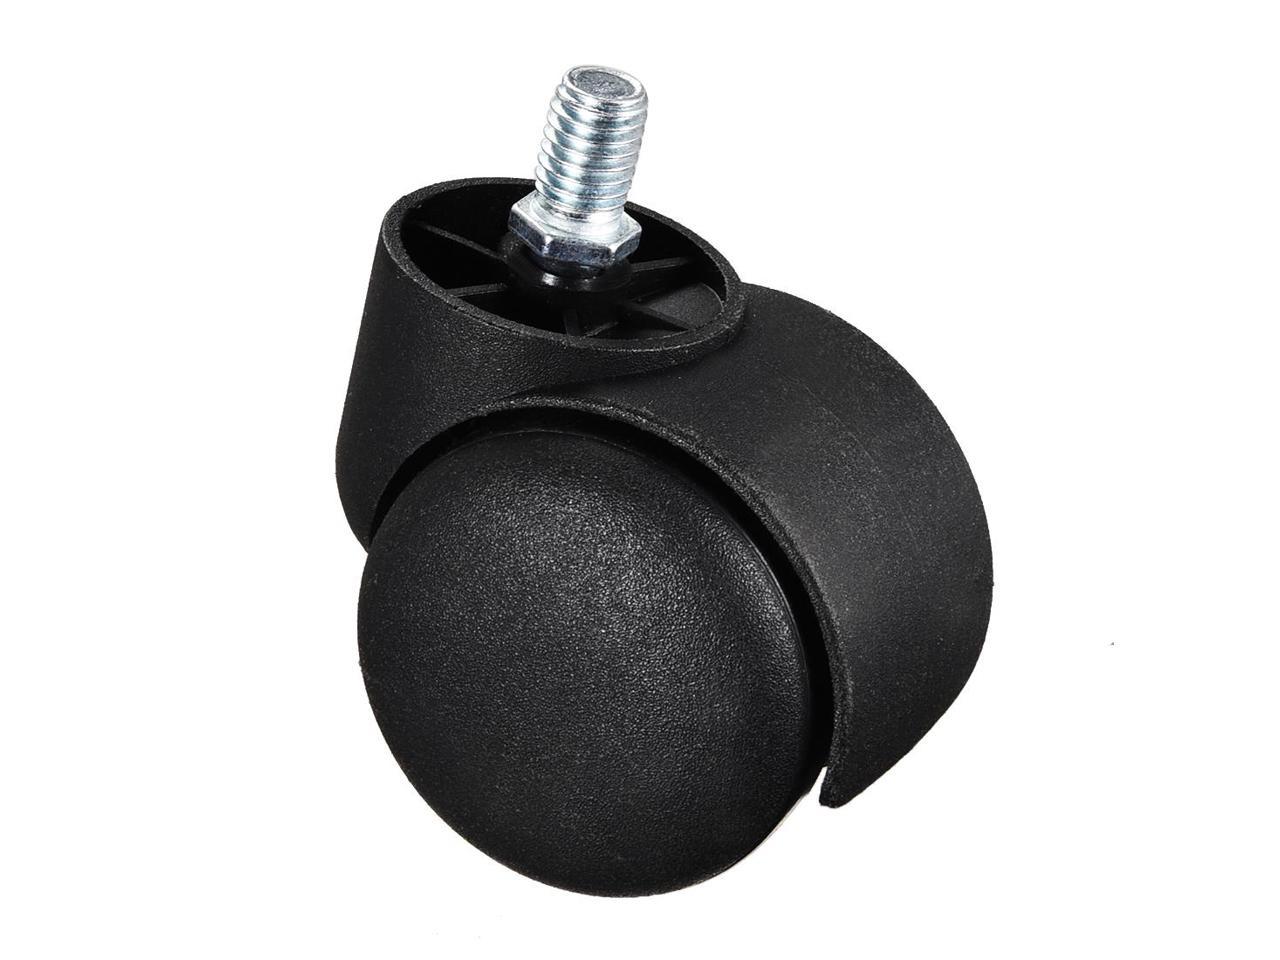 2 Inch Pu Twin Wheel M10x15mm Threaded Caster Black with Brake 2pcs uxcell Swivel Caster Wheel 